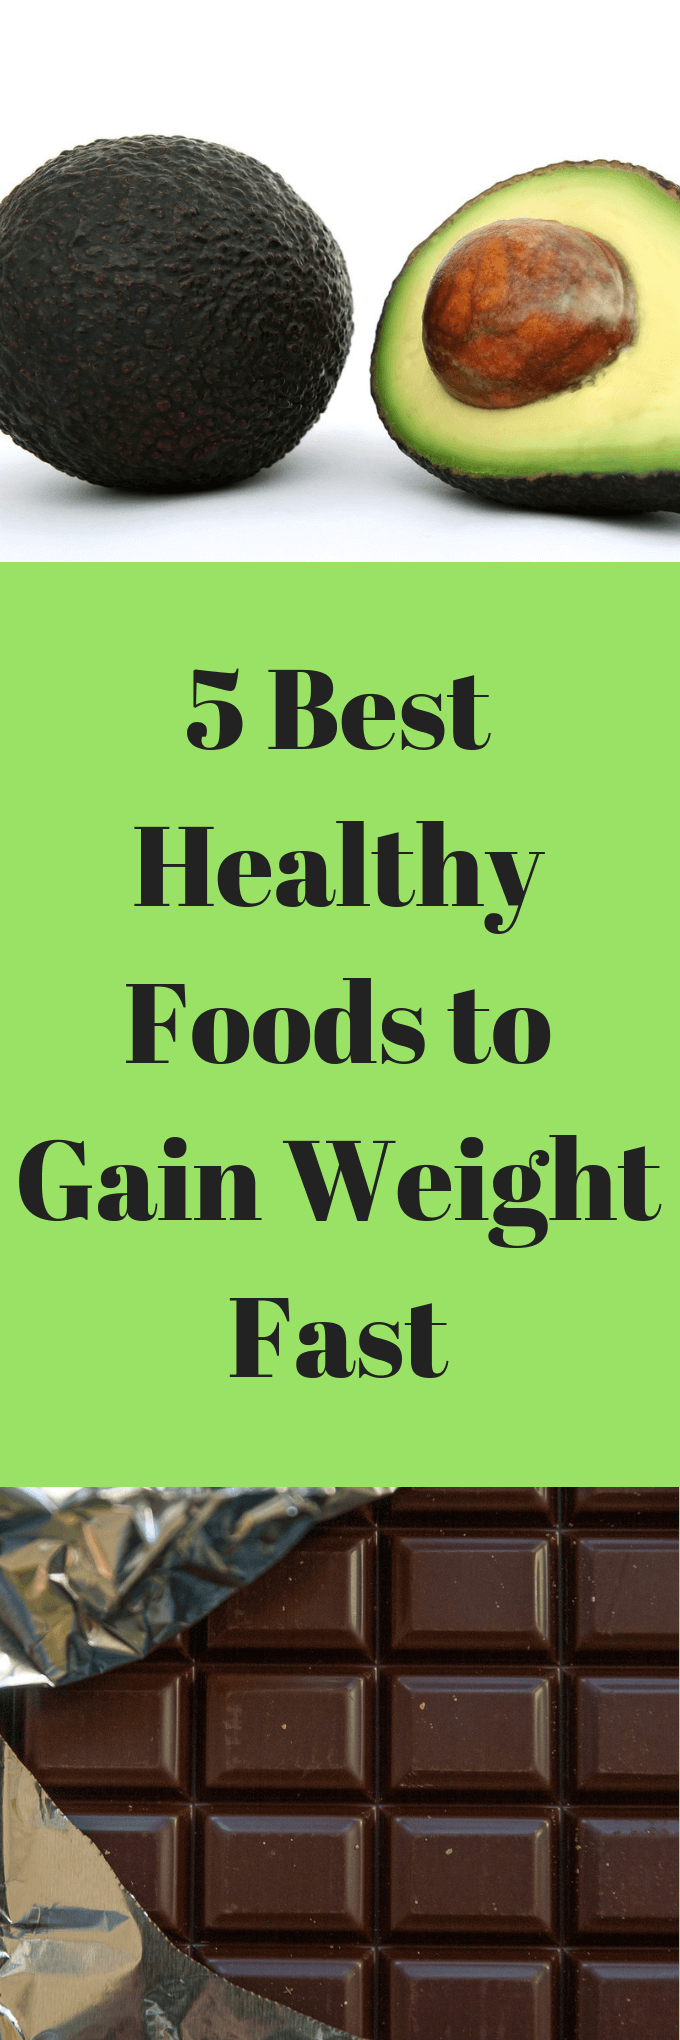 5 Best Healthy Foods to Gain Weight Fast - Mints Recipes